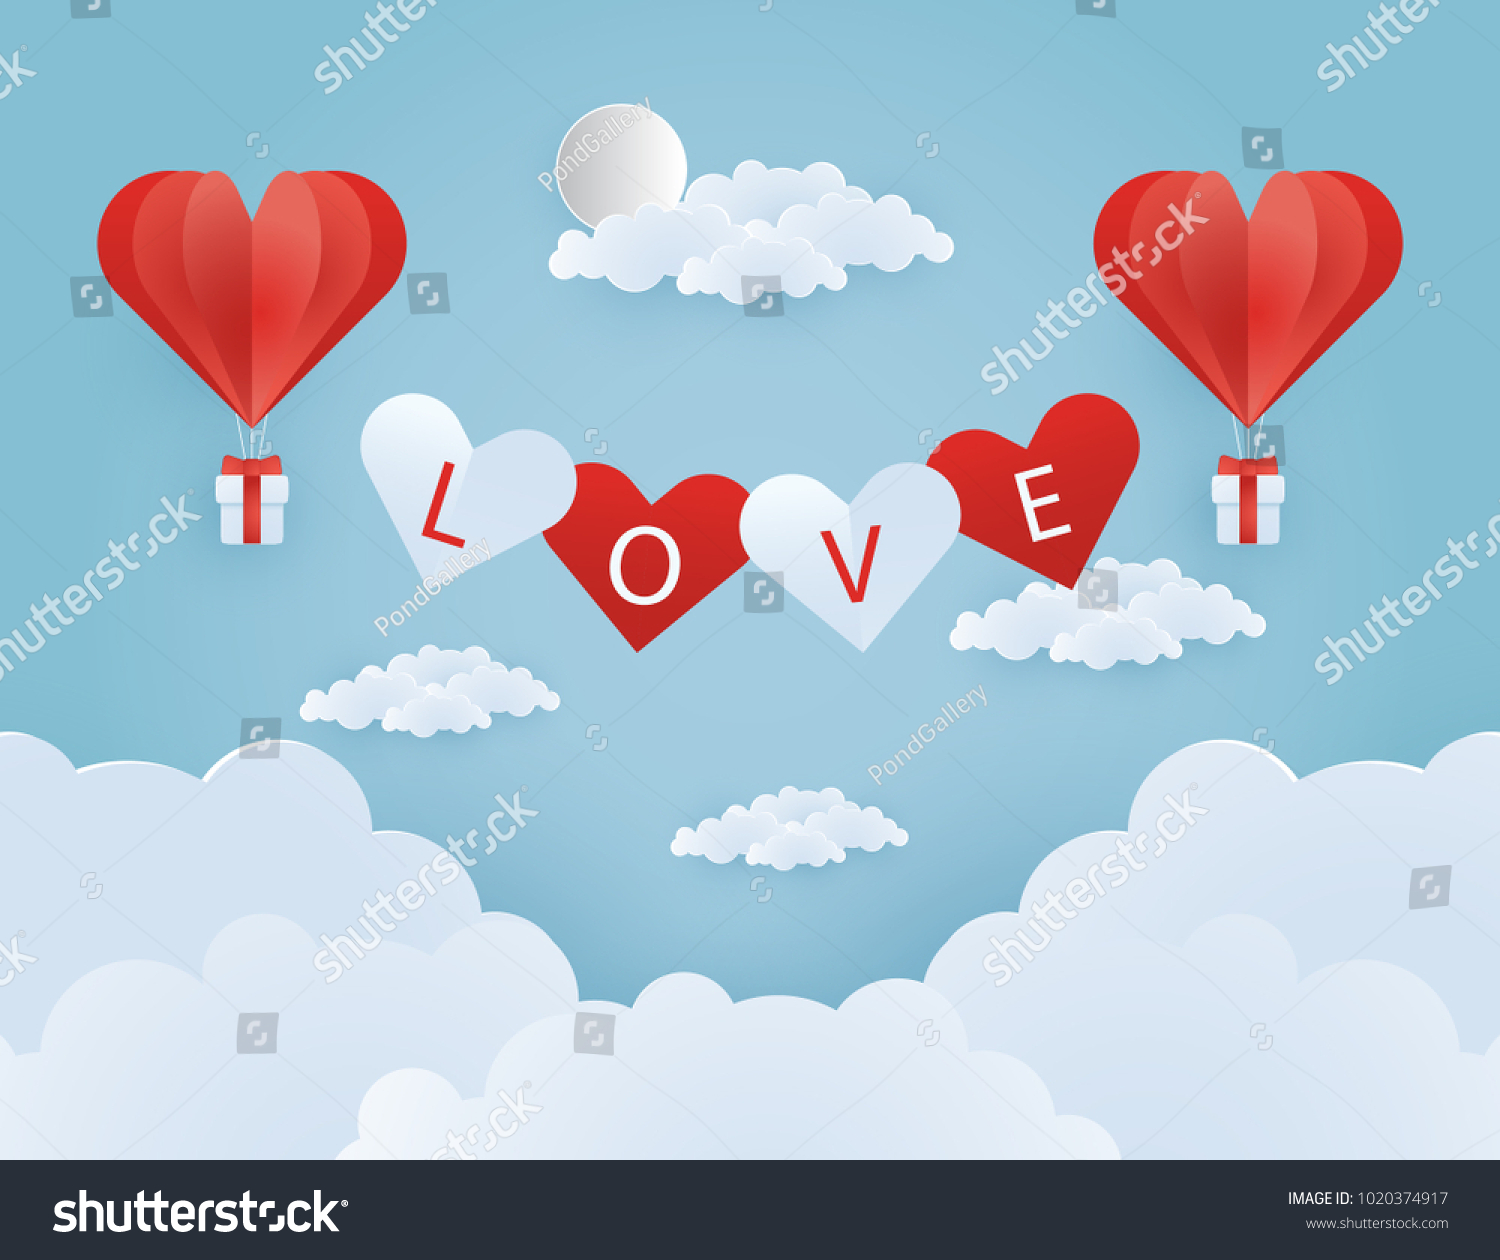 Origami made hot air balloon flying on the sky with heart float on the sky, illustration of love and valentine day, vector paper art and craft style illustration. #1020374917